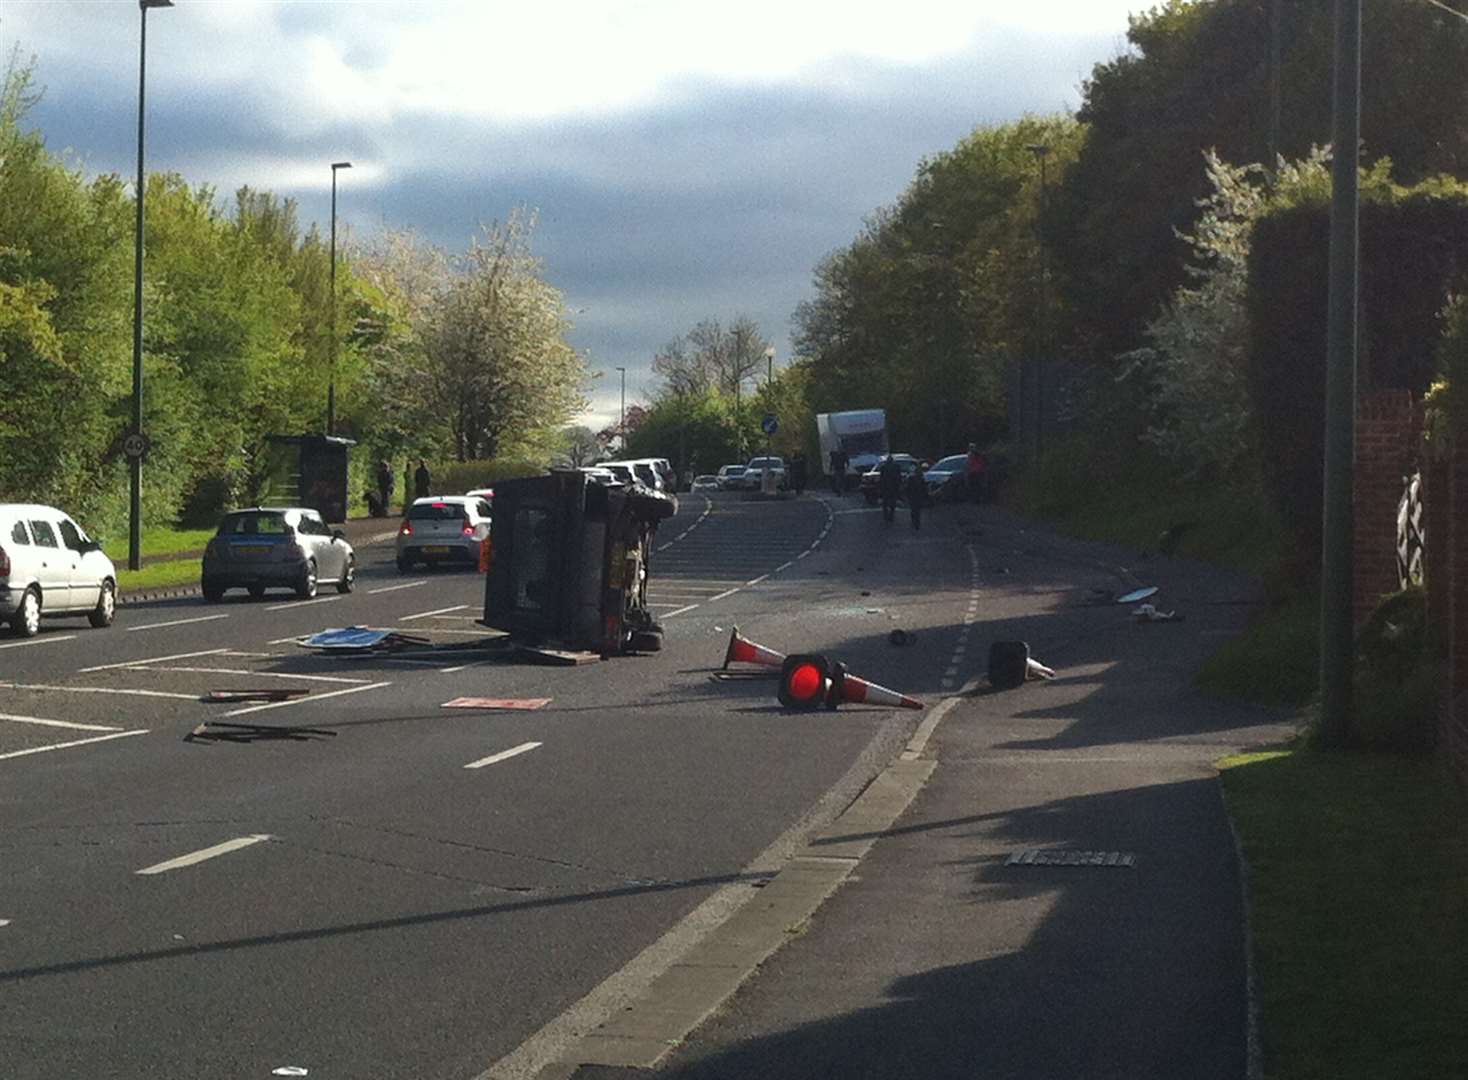 Truck rolls over in Maidstone accident